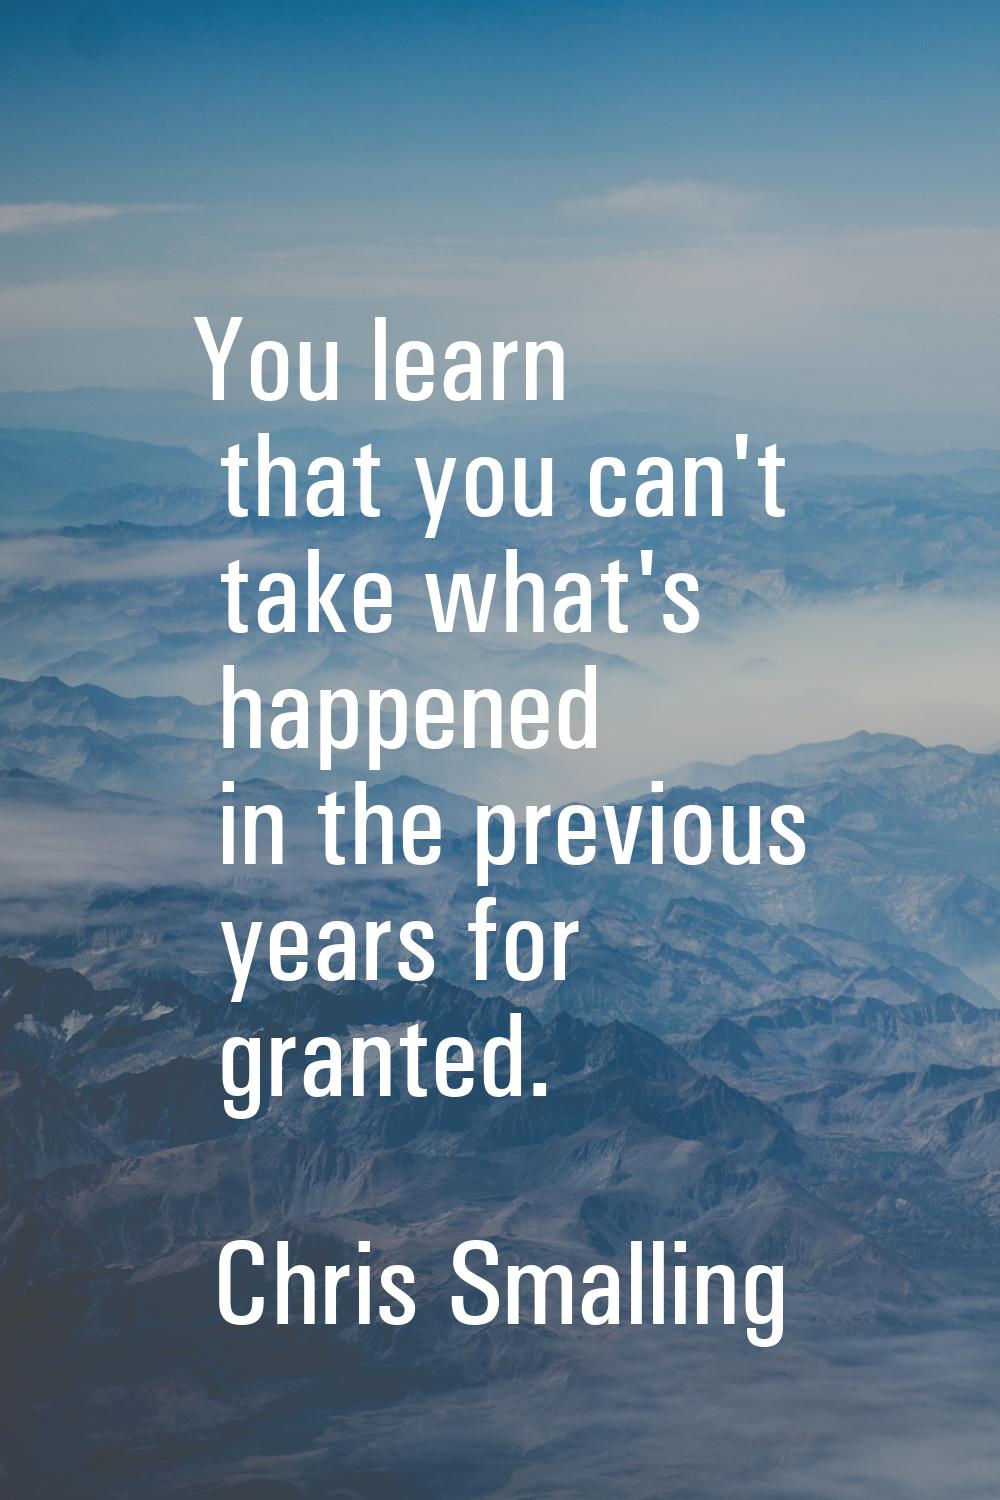 You learn that you can't take what's happened in the previous years for granted.